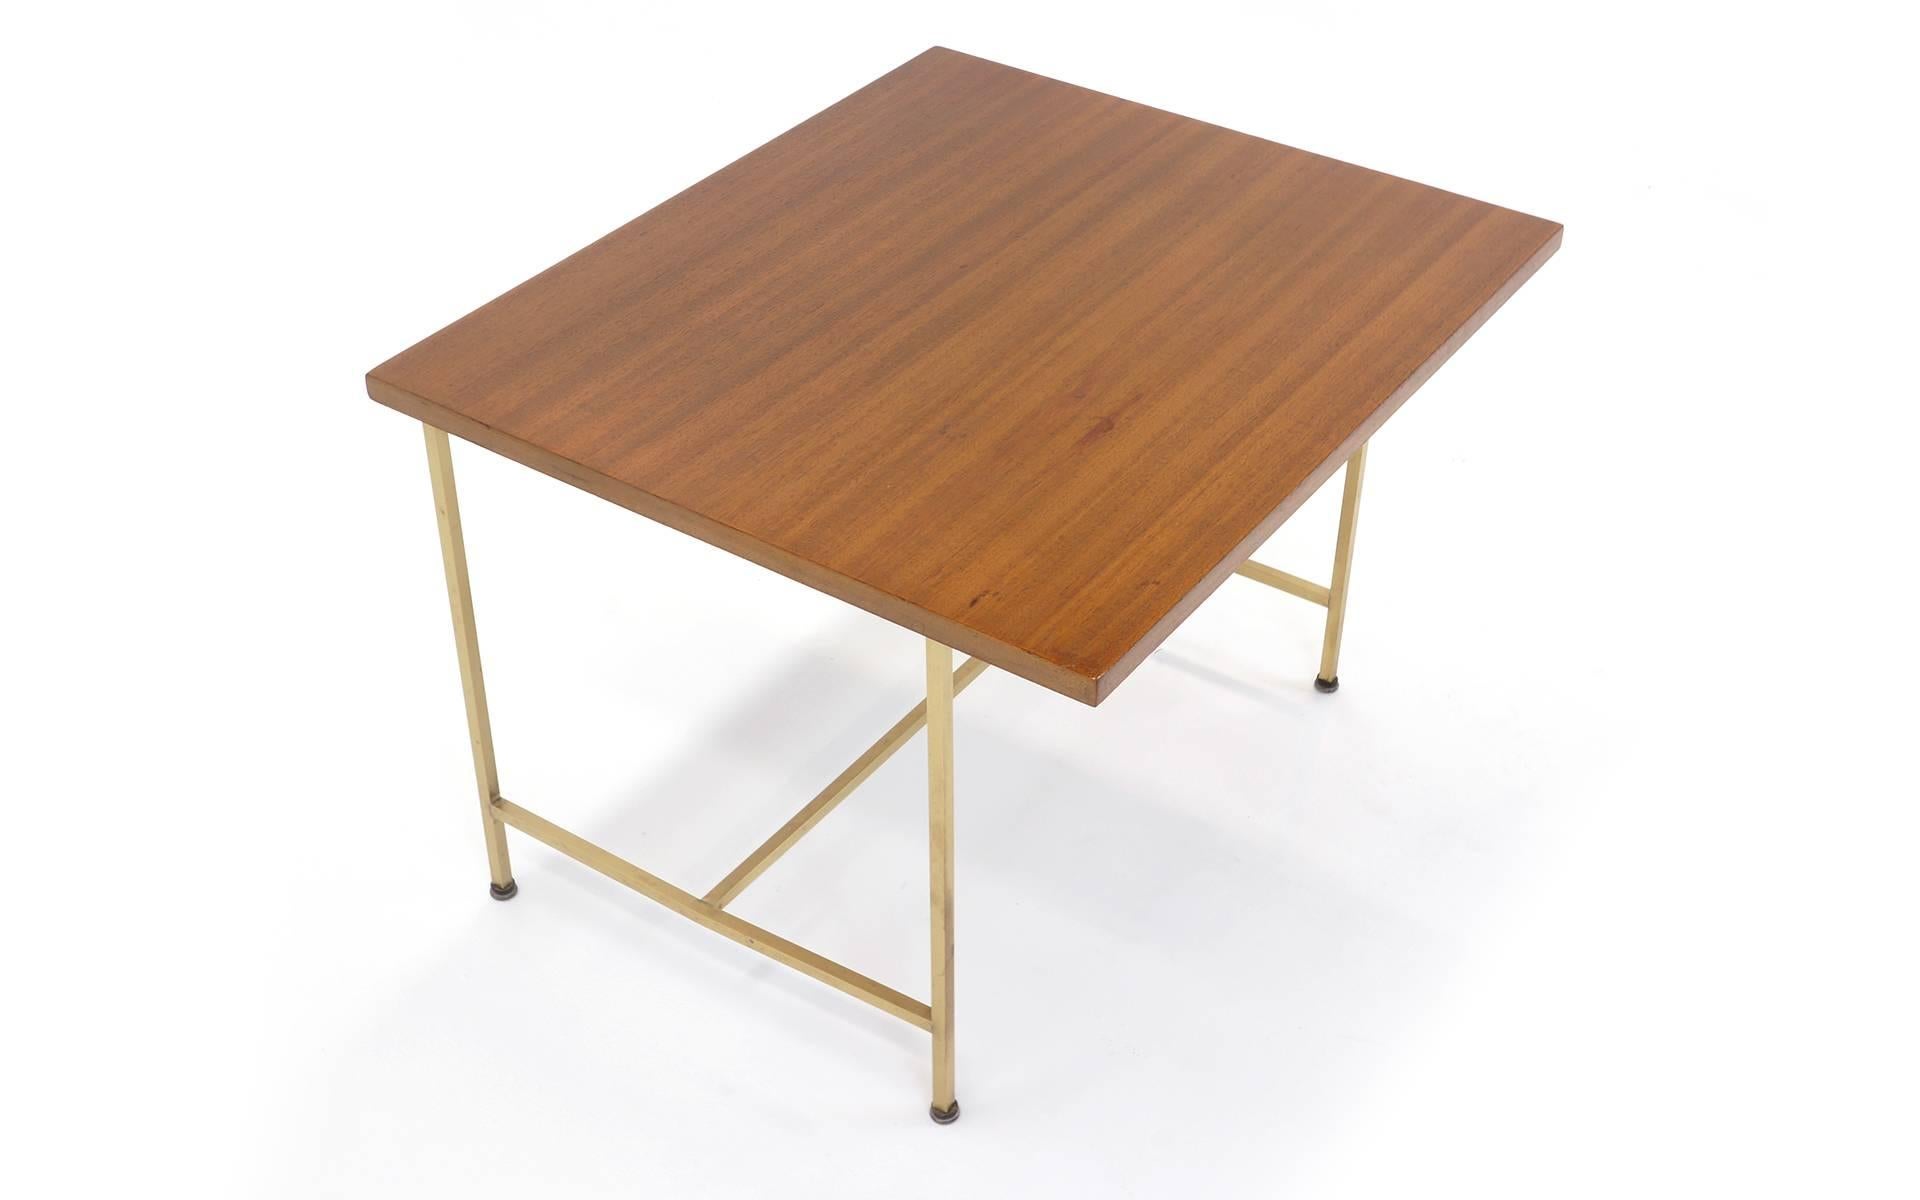 Paul McCobb Occasional Table with Brass Frame and Cantilevered Top In Excellent Condition For Sale In Kansas City, MO